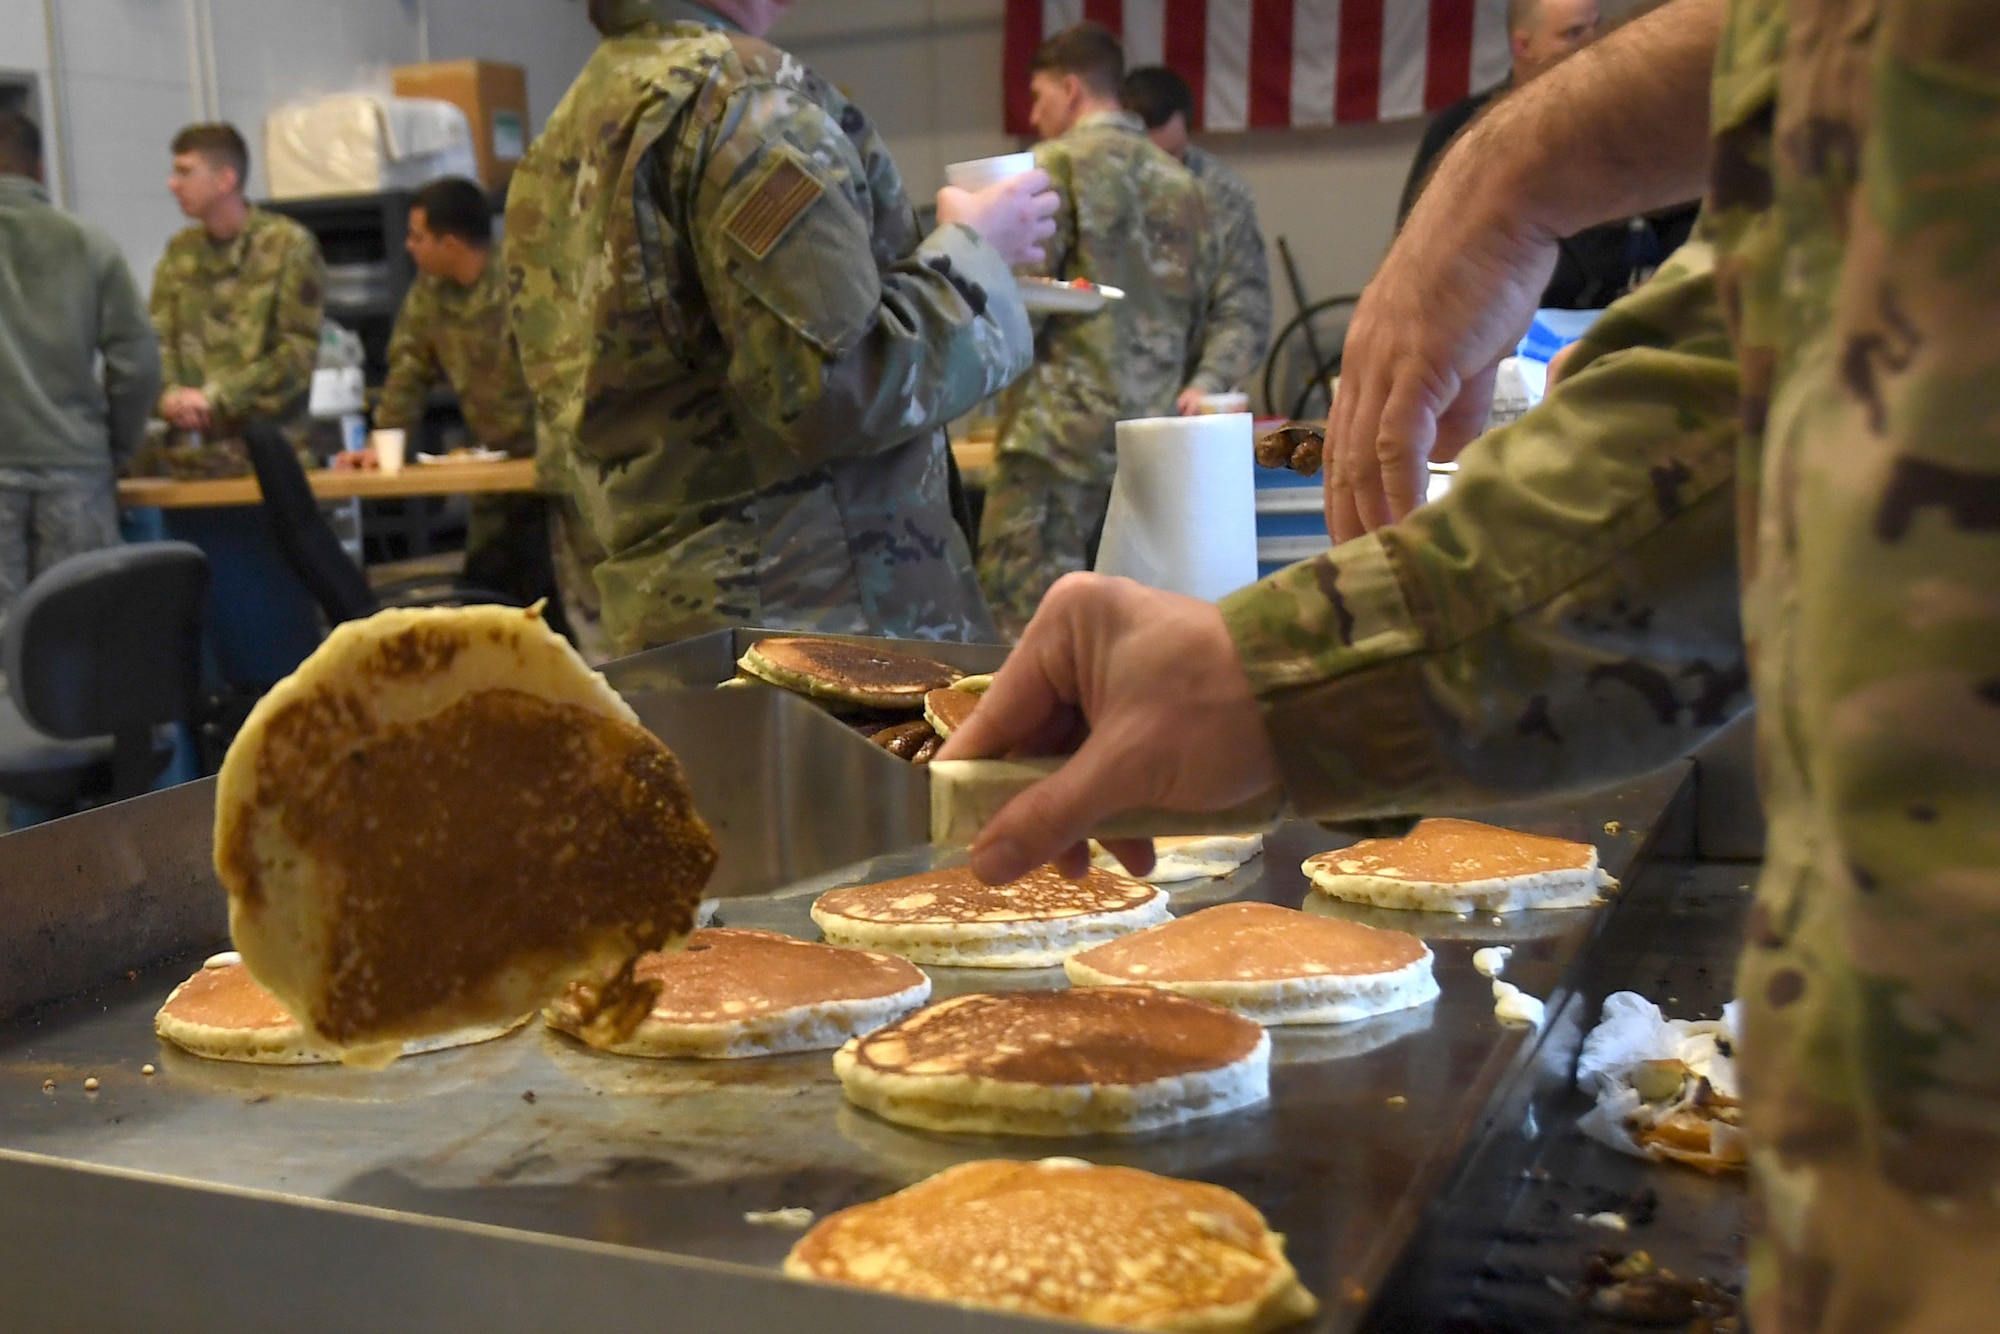 North Carolina Air National Guardsmen cook pancakes on a grill during a breakfast fundraiser, Jan. 12, 2020 at the 235th Air Traffic Control Squadron in New London, N.C. Members of the North Carolina Air National Guard as well as local airport authorities and law enforcement were invited to participate in a pancake breakfast social in order to strengthen community ties and build new relationships while raising funds for Morale, Welfare and Recreation.